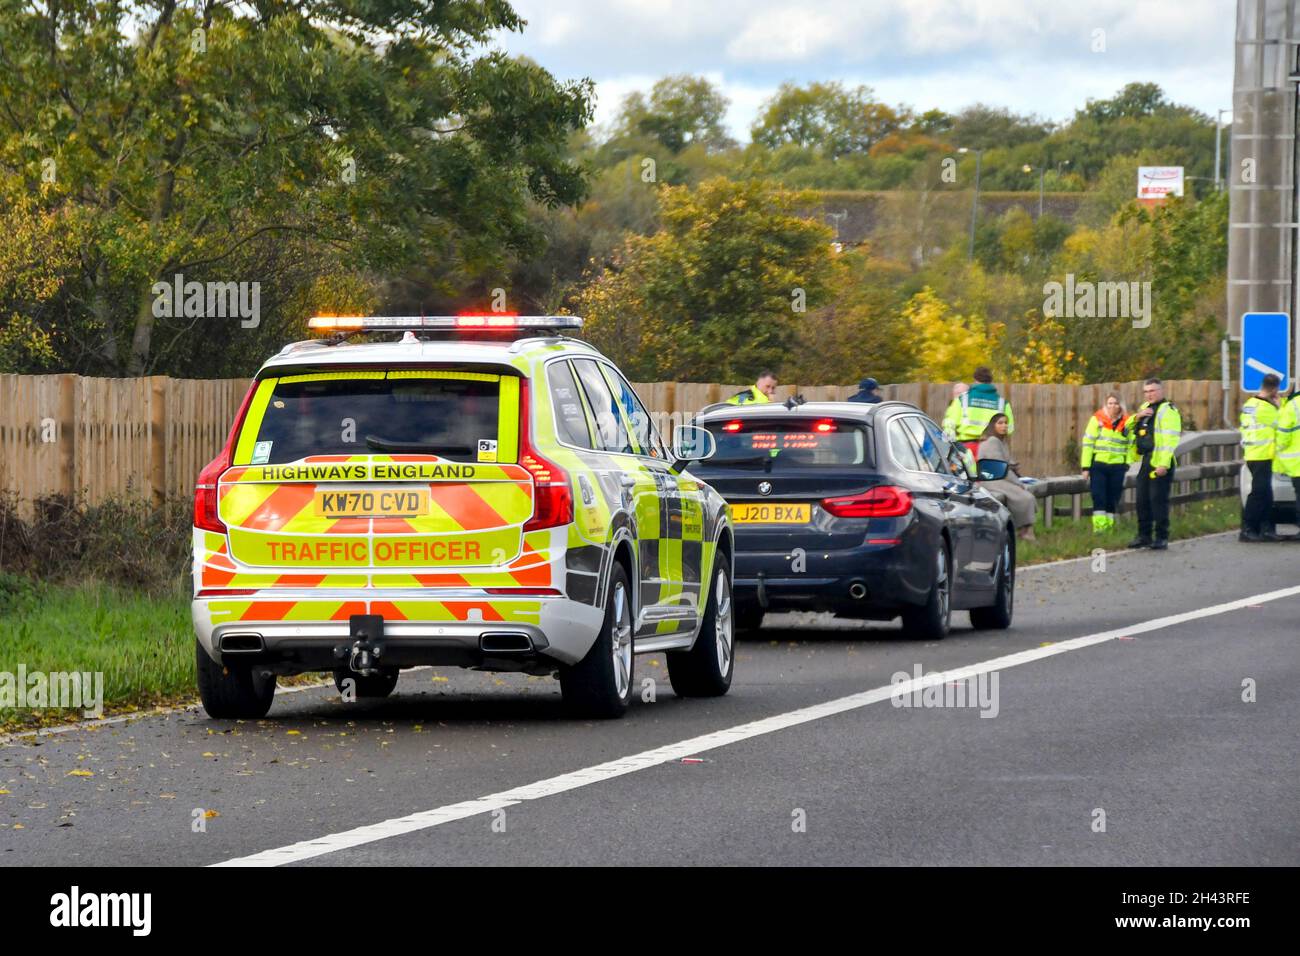 Strensham, England - October 2021: Traffic officer patrol car on the hard shoulder of the M5 motorway with flashing lights to warn of an accident Stock Photo